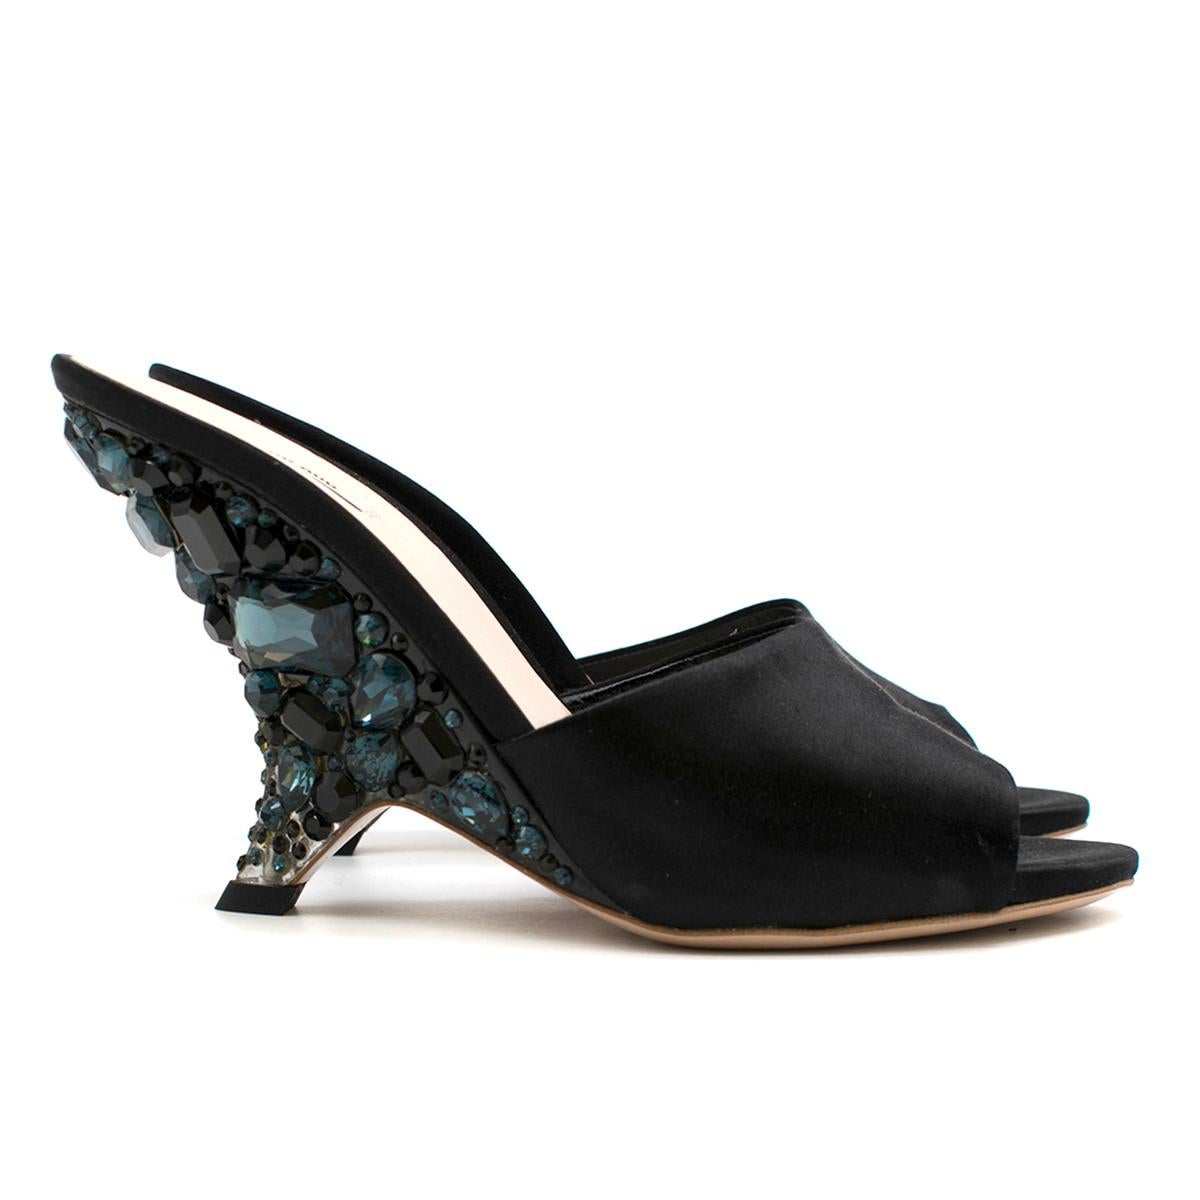 Miu Miu Black Crystal Embellished Wedge Mules 

- Black Mule Heels 
- Curved perspex heels embellished with blue crystals
- Black satin front strap 
- Peep toe, slim toeline 
- Beige leather insole and outsole

This item comes with an additional